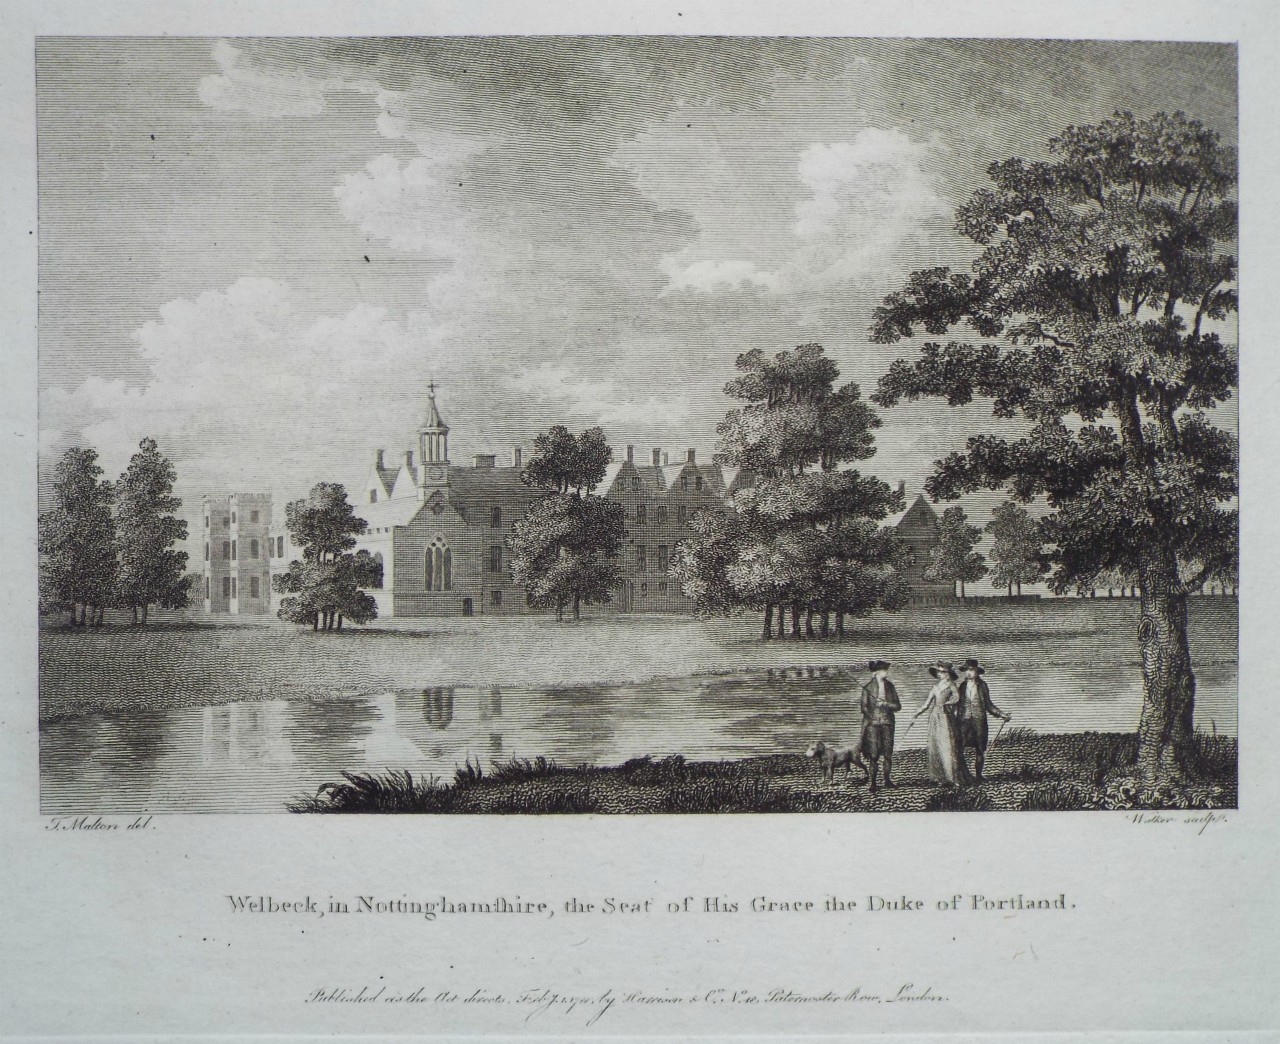 Print - Welbeck, in Nottinghamshire, the Seat of His Grace the Duke of Portland. - 